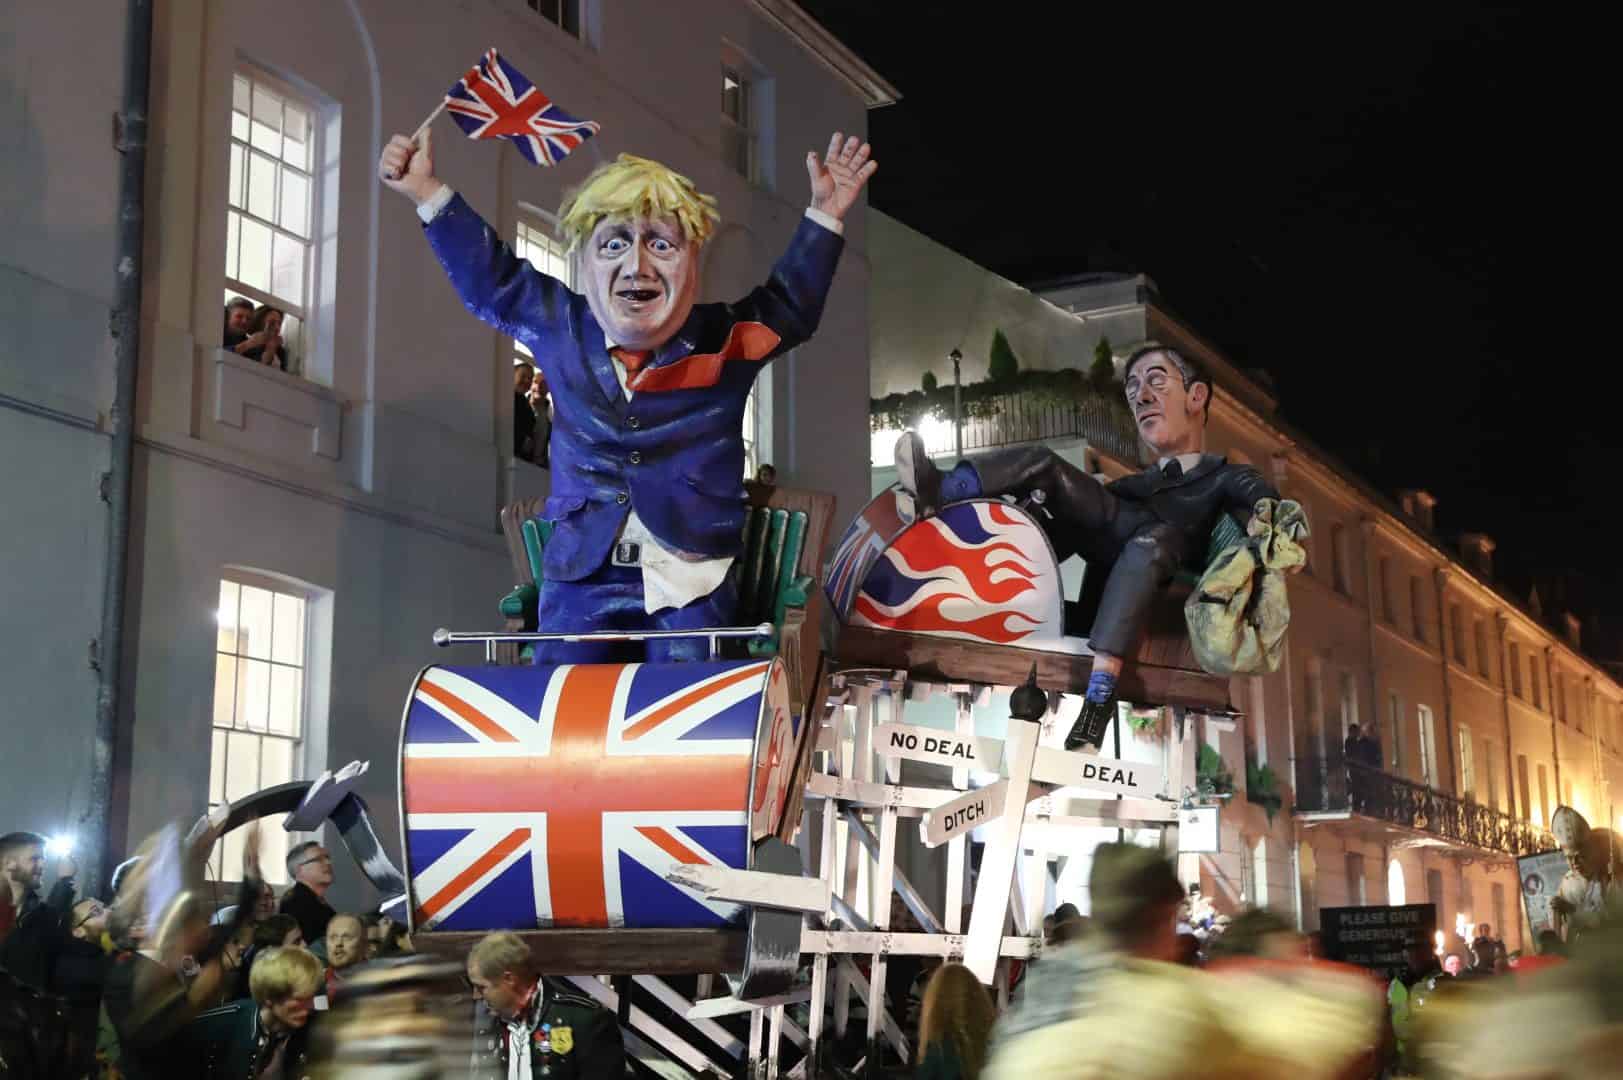 Johnson and Rees-Mogg Brexit rollercoaster paraded through streets for Bonfire Night